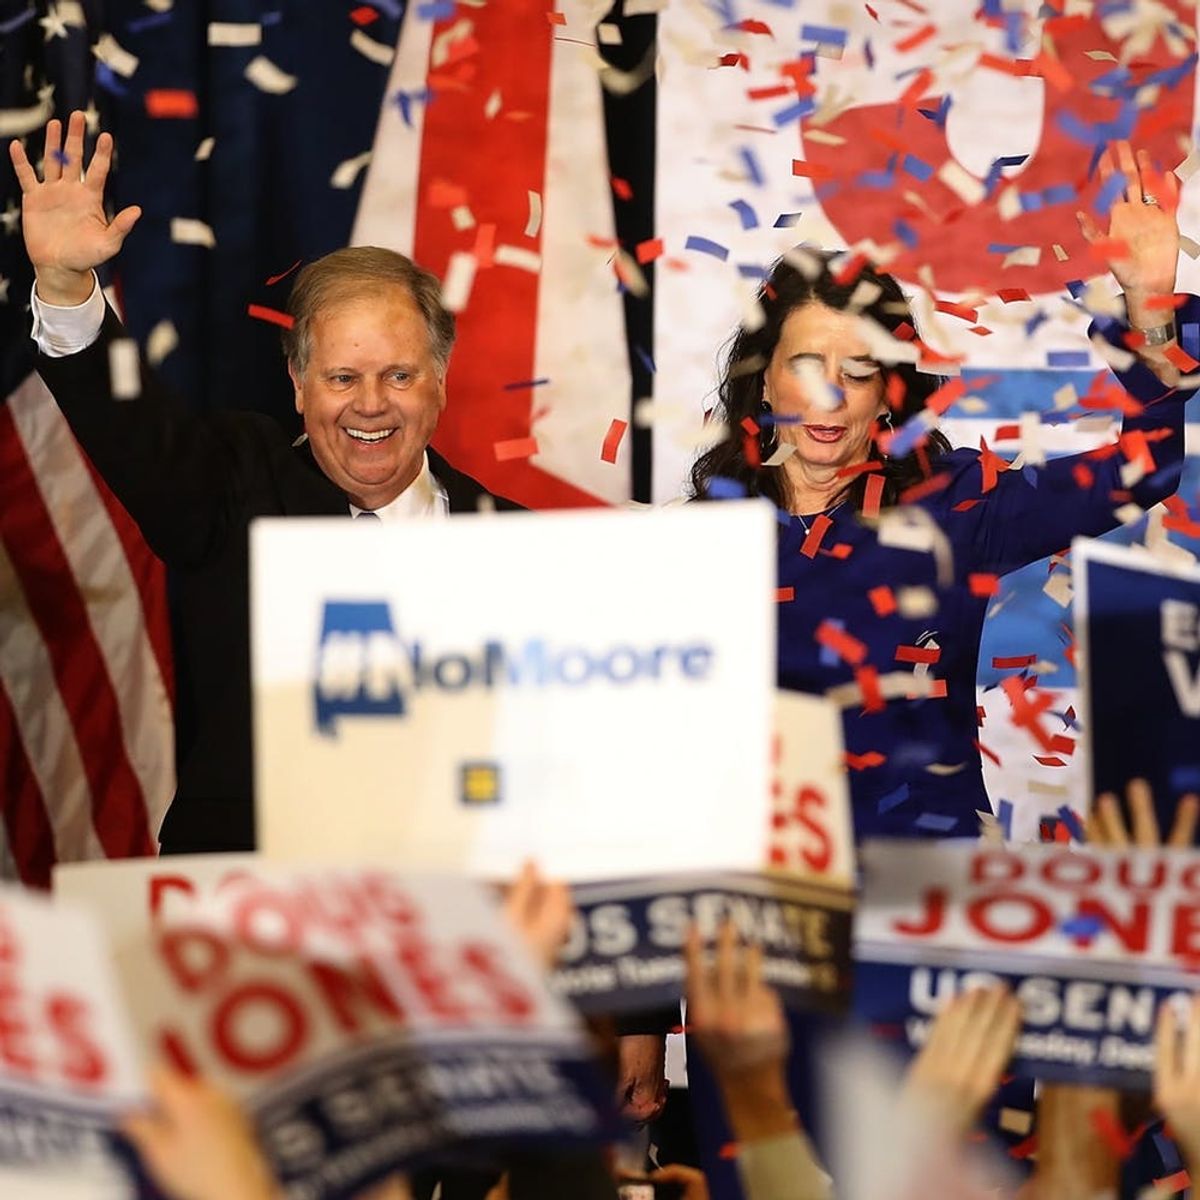 We Can Thank Black Women Voters for Roy Moore’s Alabama Senate Defeat